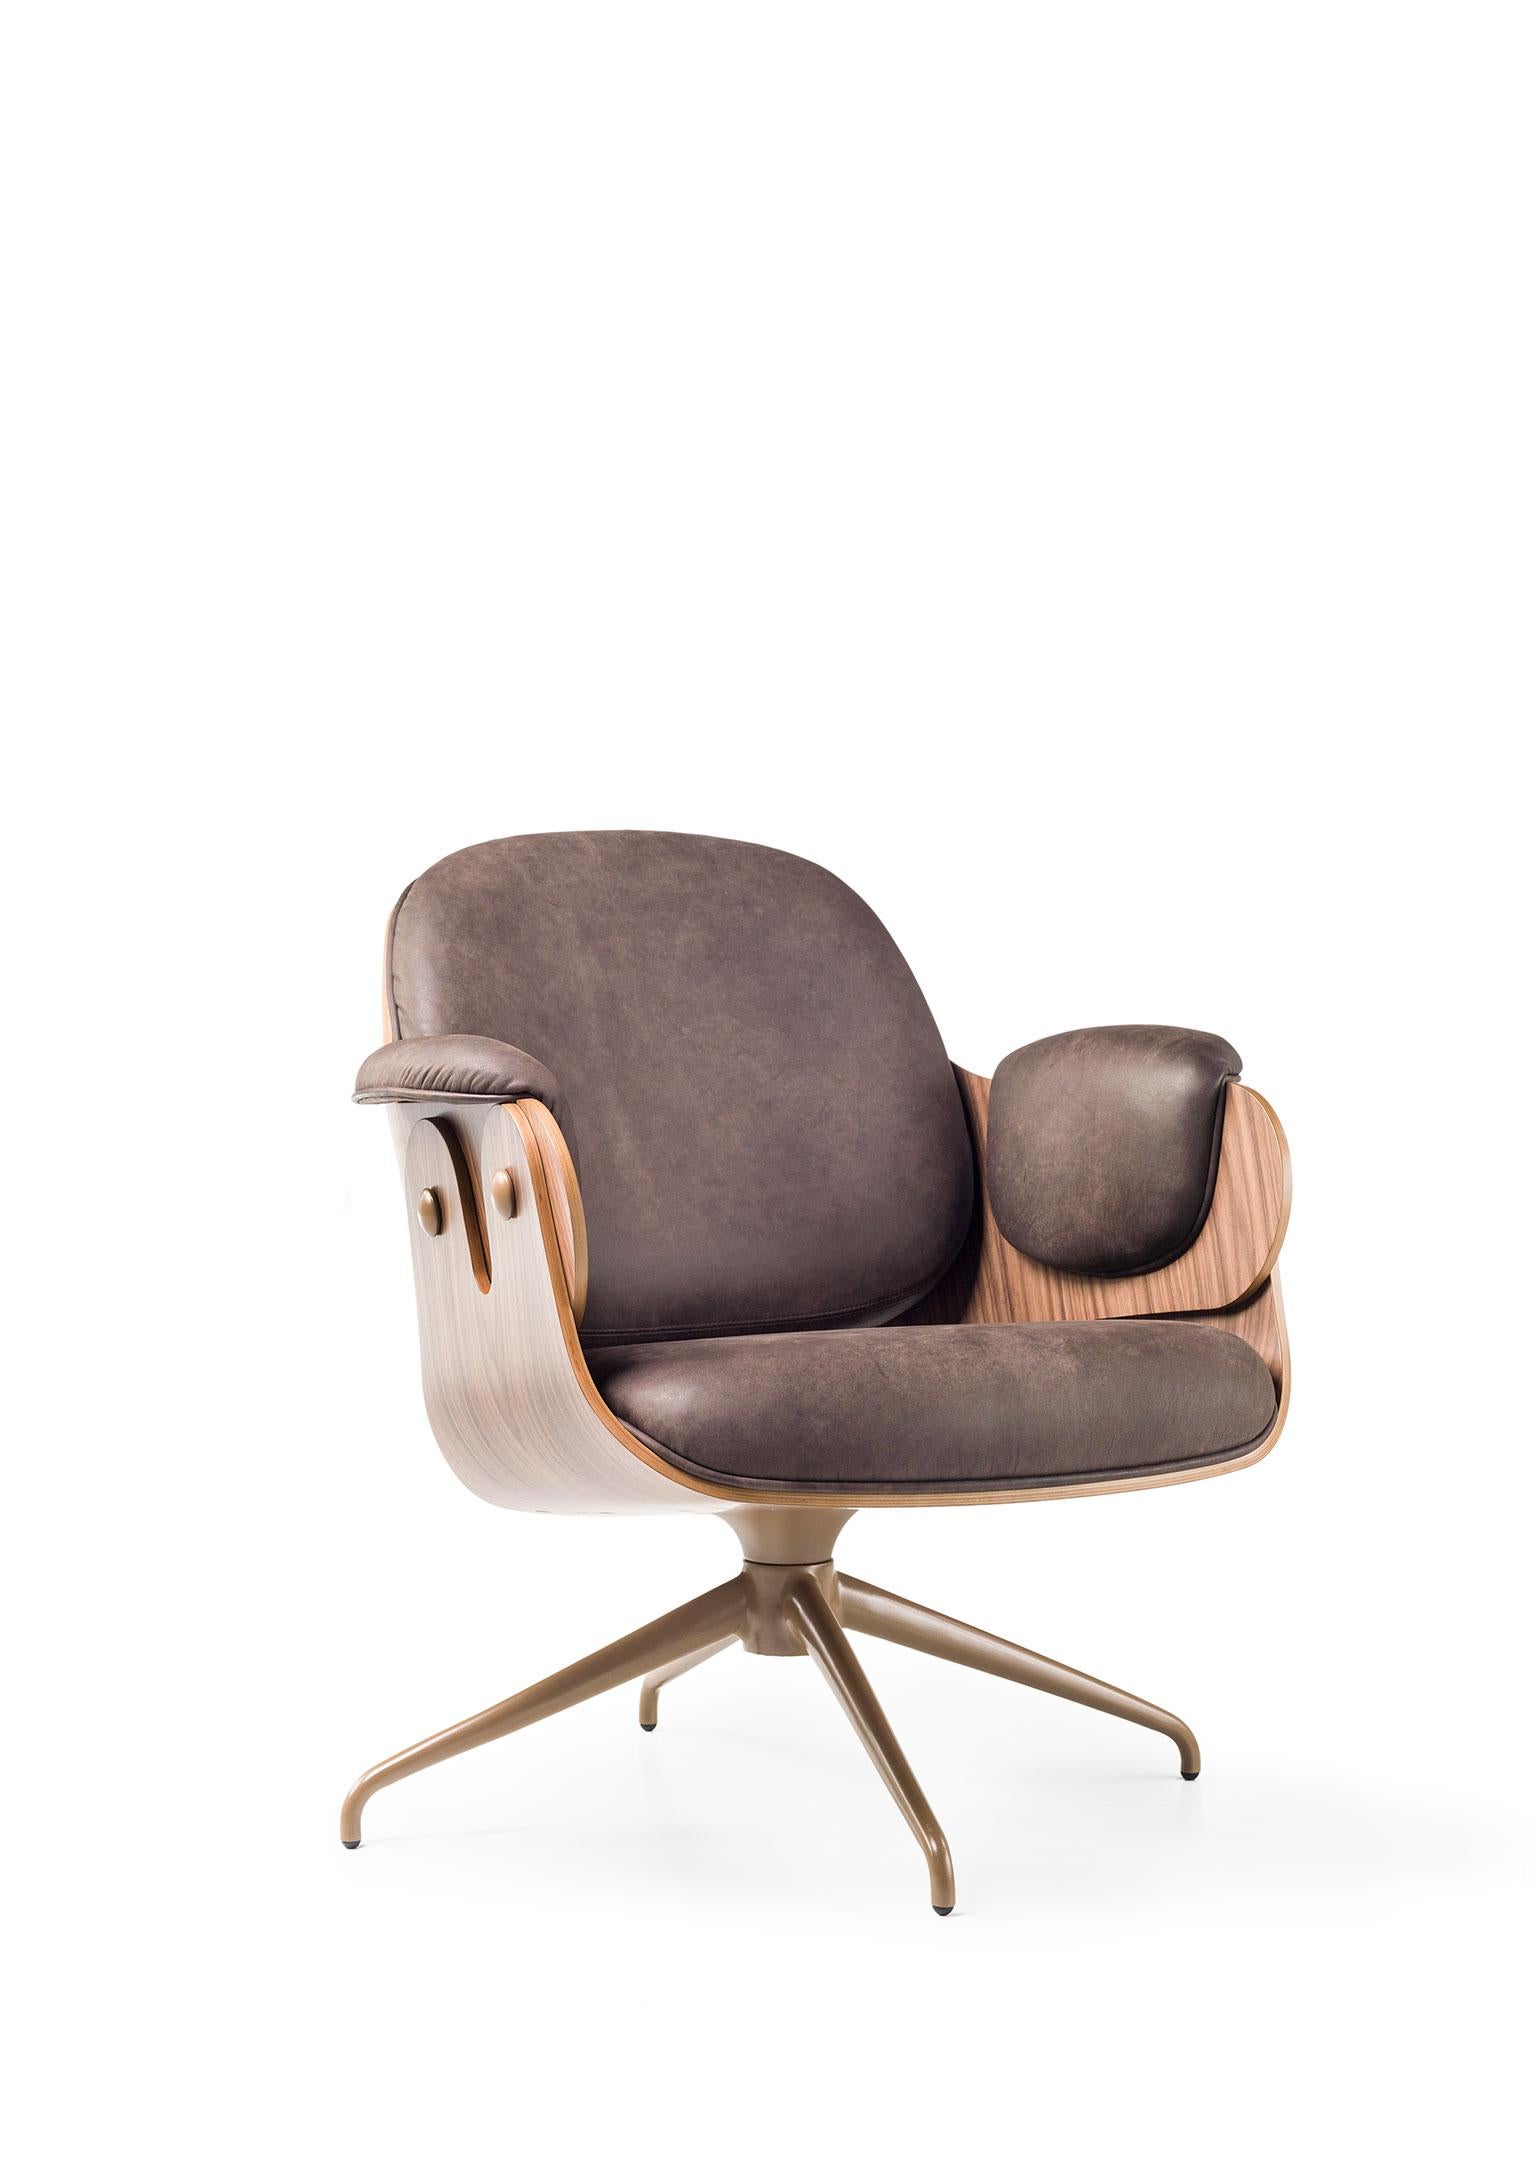 Spanish Low Lounger Armchair by Jaime Hayon for BD Barcelona For Sale